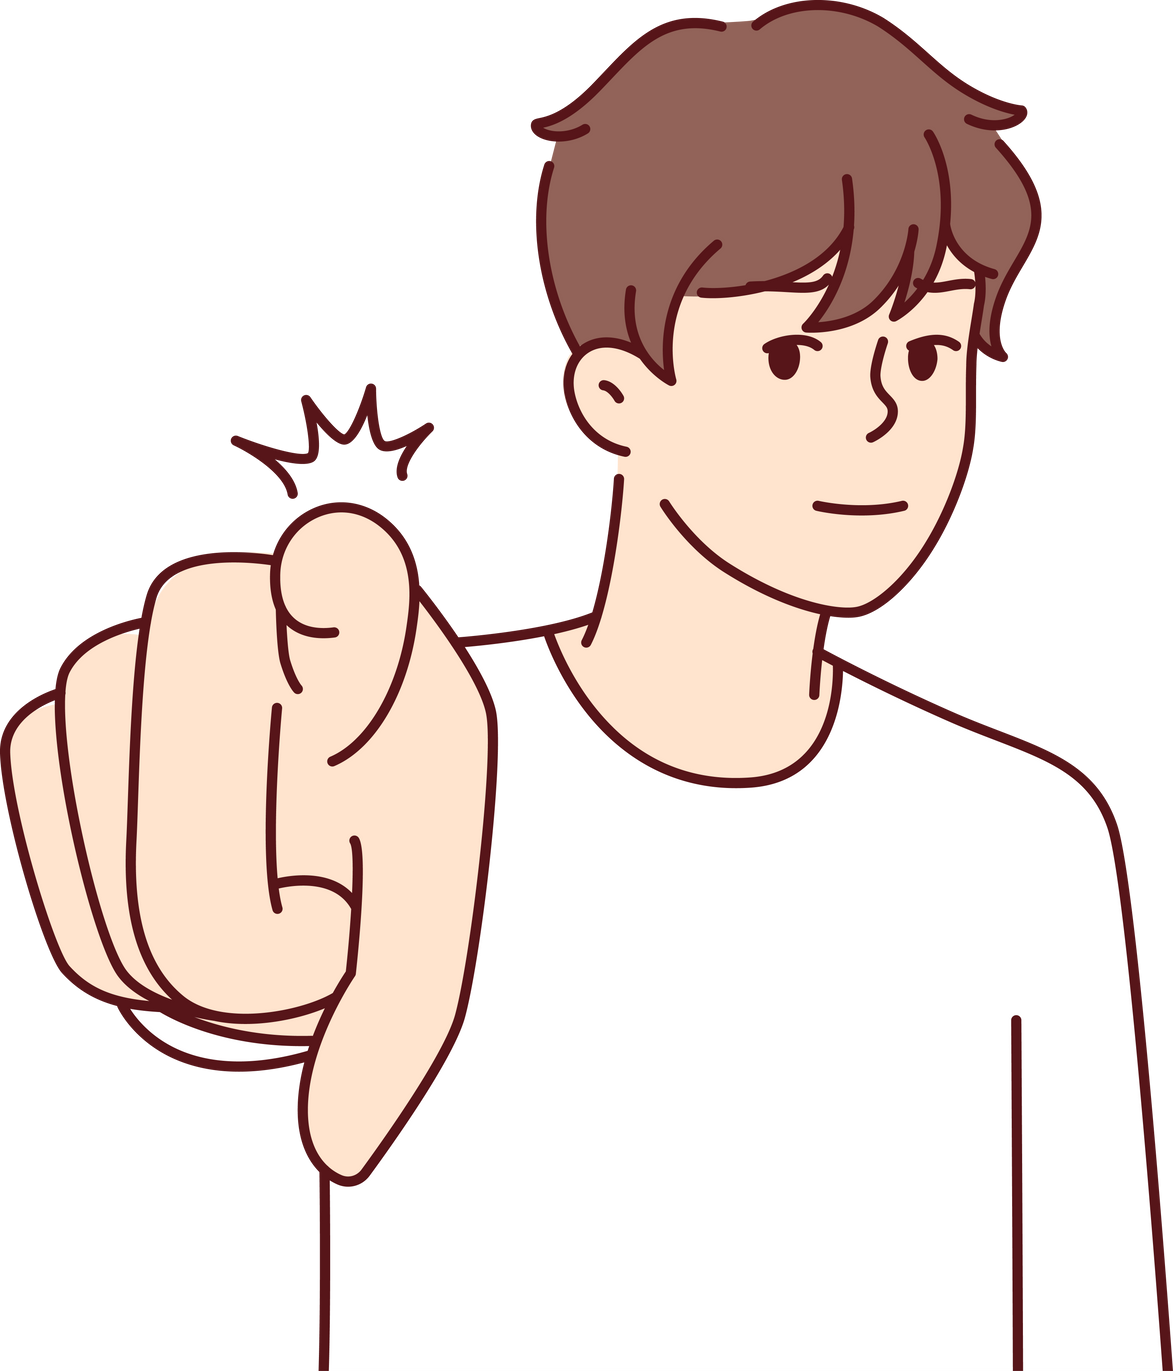 Confident Man Pointing Finger at Camera to Press Button on Invisible Screen. Vector Image